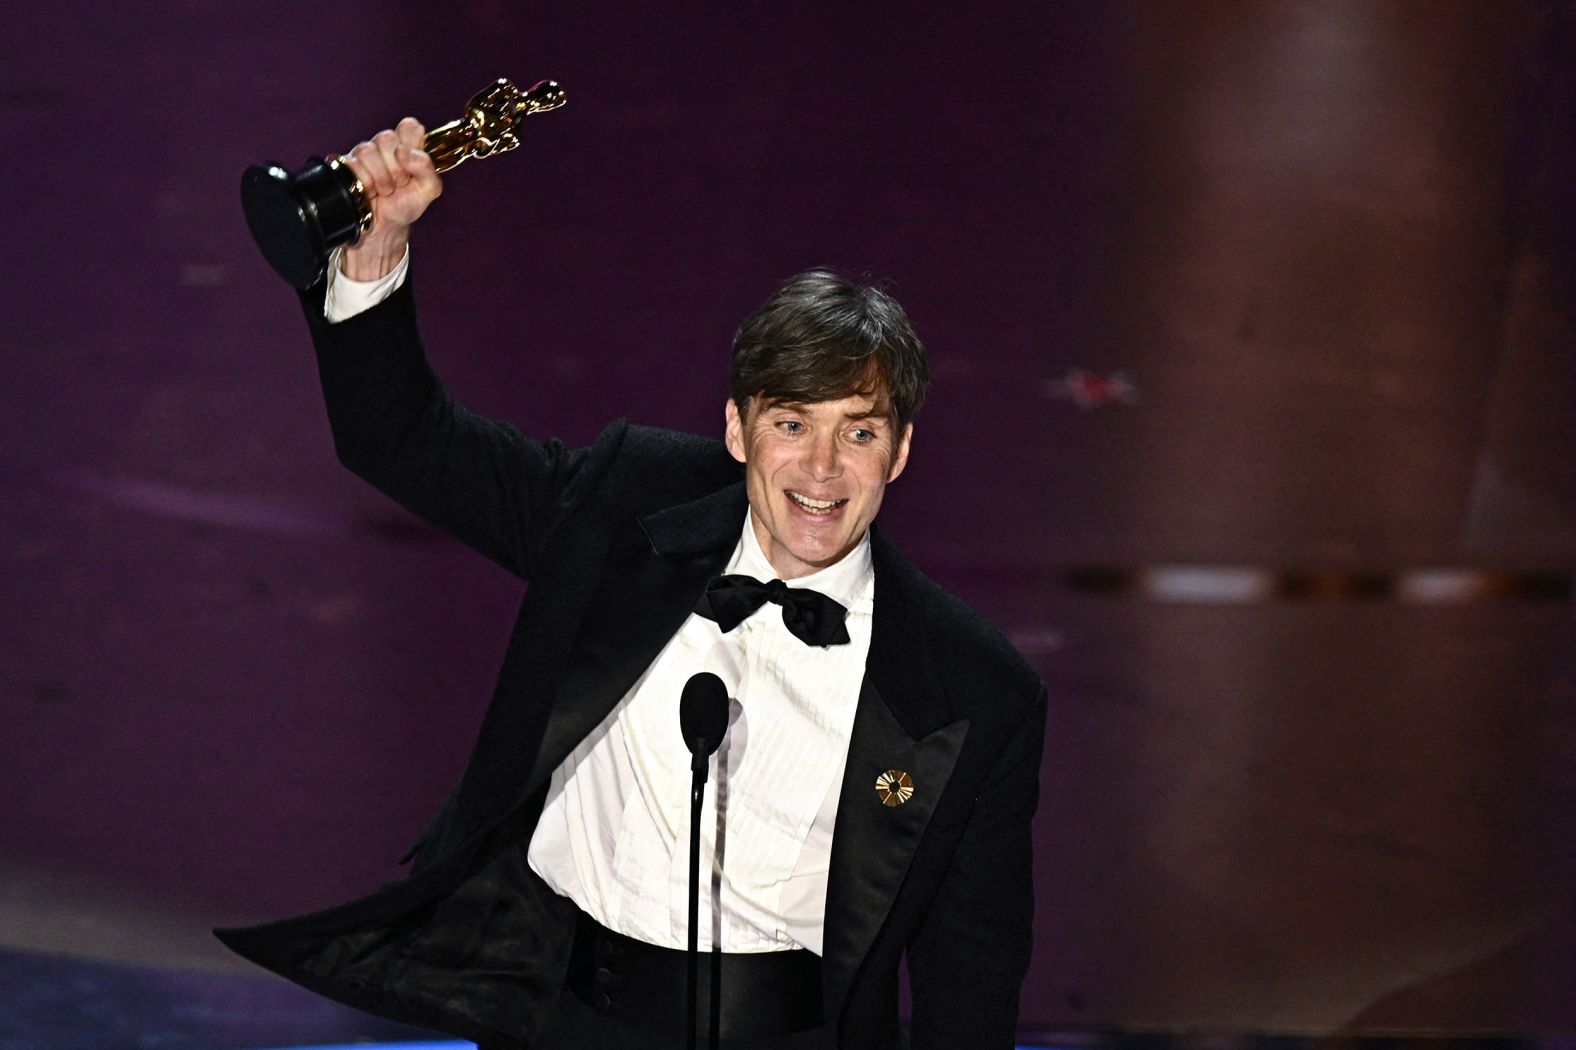 Cillian Murphy celebrates after winning the Oscar for best actor ("Oppenheimer"). "I'm a very proud Irishman standing here tonight," <a href="index.php?page=&url=https%3A%2F%2Fwww.cnn.com%2Fentertainment%2Flive-news%2Foscars-academy-awards-03-10-24%2Fh_5b9575b476729d8bee0163293d63766b" target="_blank">he said</a>.